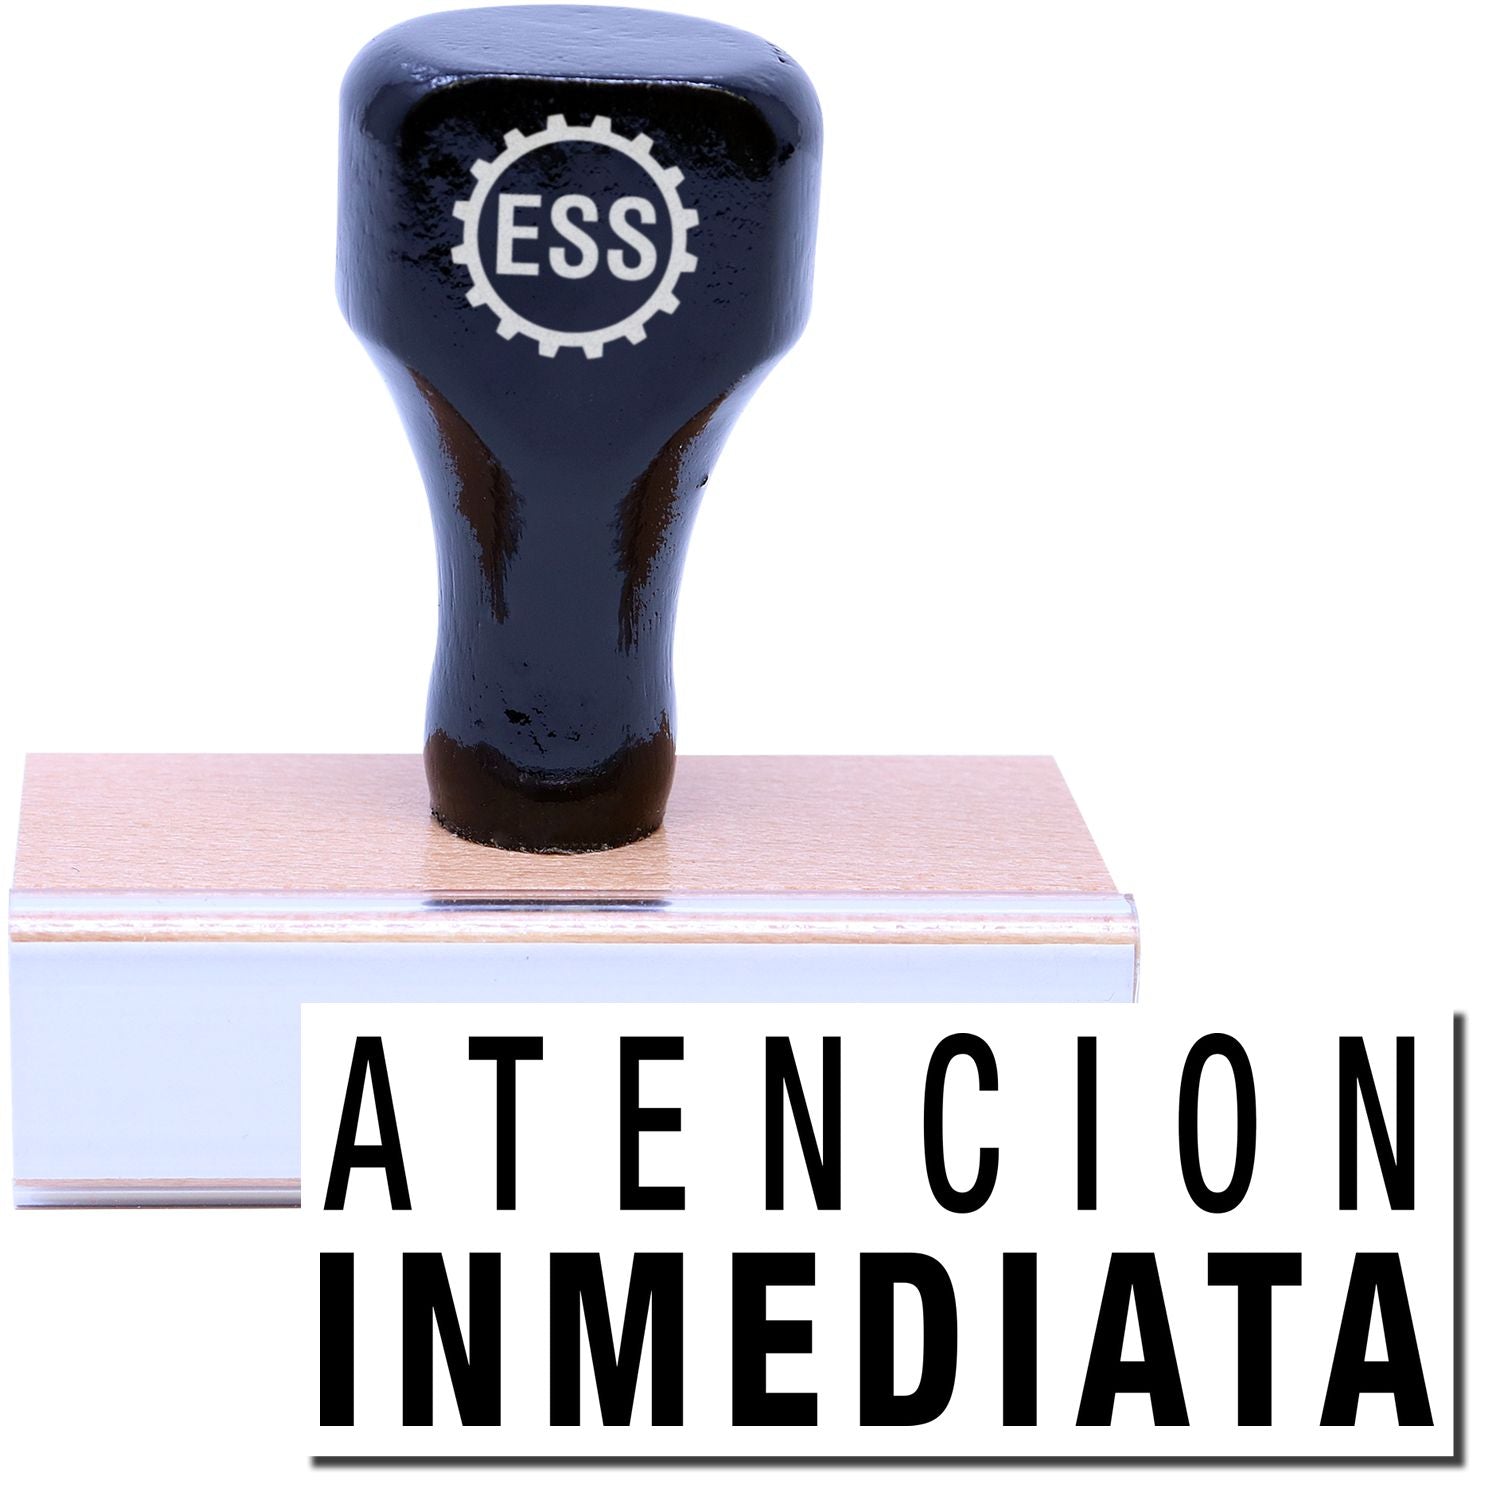 A stock office rubber stamp with a stamped image showing how the text "ATENCION INMEDIATA" is displayed after stamping.